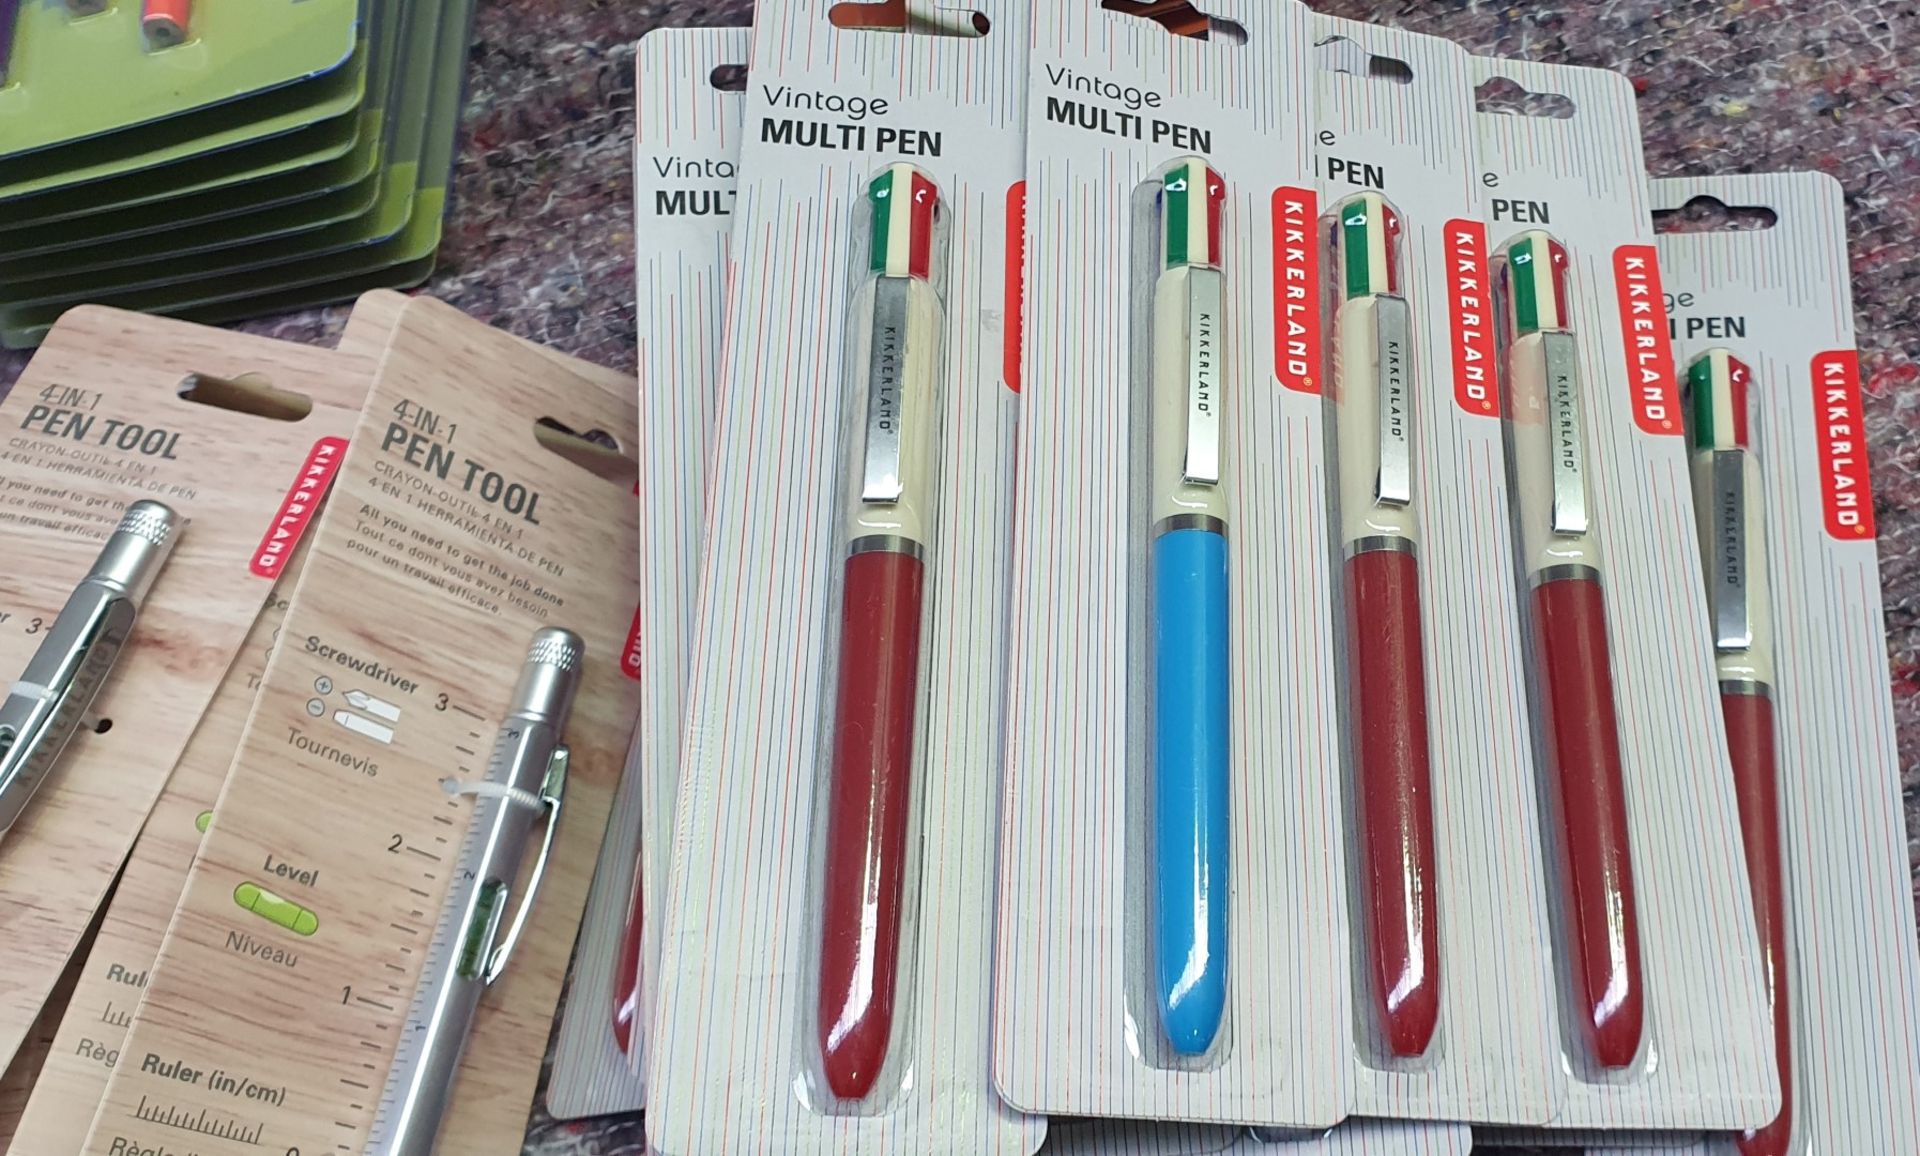 96 x Assorted Kikkerland Stationary Items Including 4 in 1 Pens, Feather Pens, Woodland Pencil Sets, - Image 3 of 9